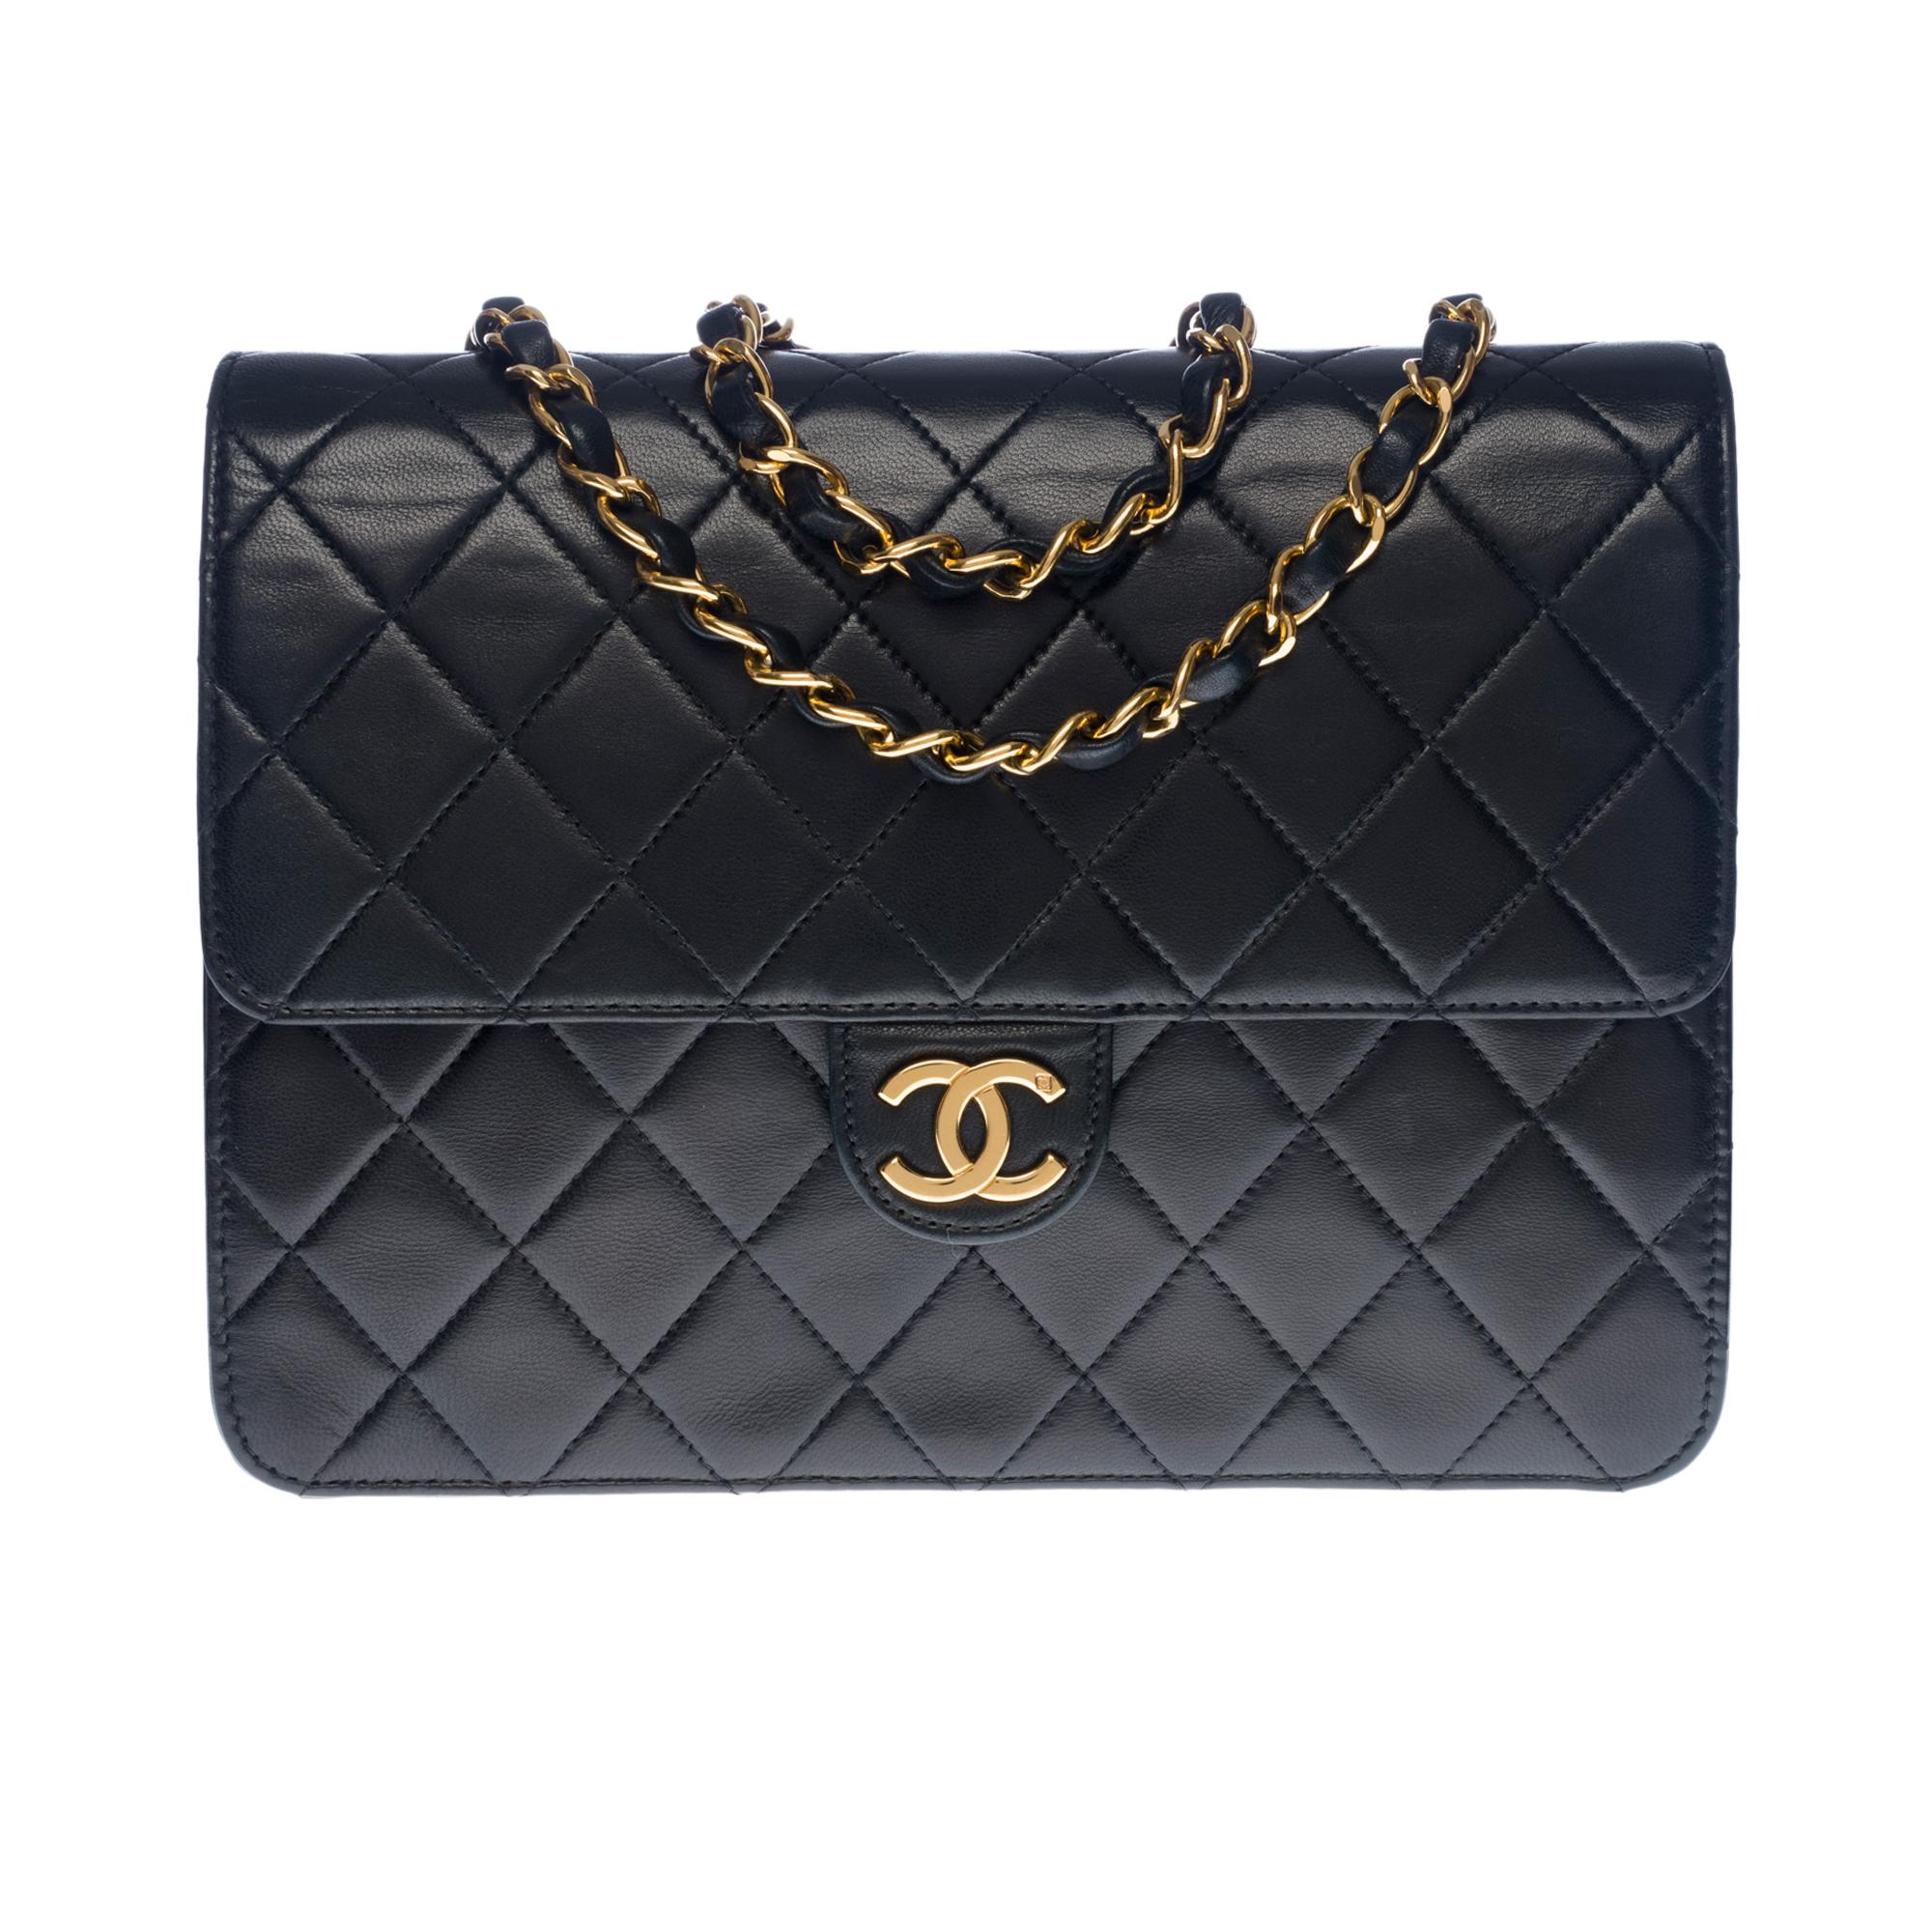 Amazing Chanel Classic Flap Bag in black quilted lambskin leather, gold-tone hardware, a gold-tone metal chain handle interlaced with black leather allowing a shoulder and shoulder strap

Flap closure, gold CC studded clasp
Bordeaux leather lining,